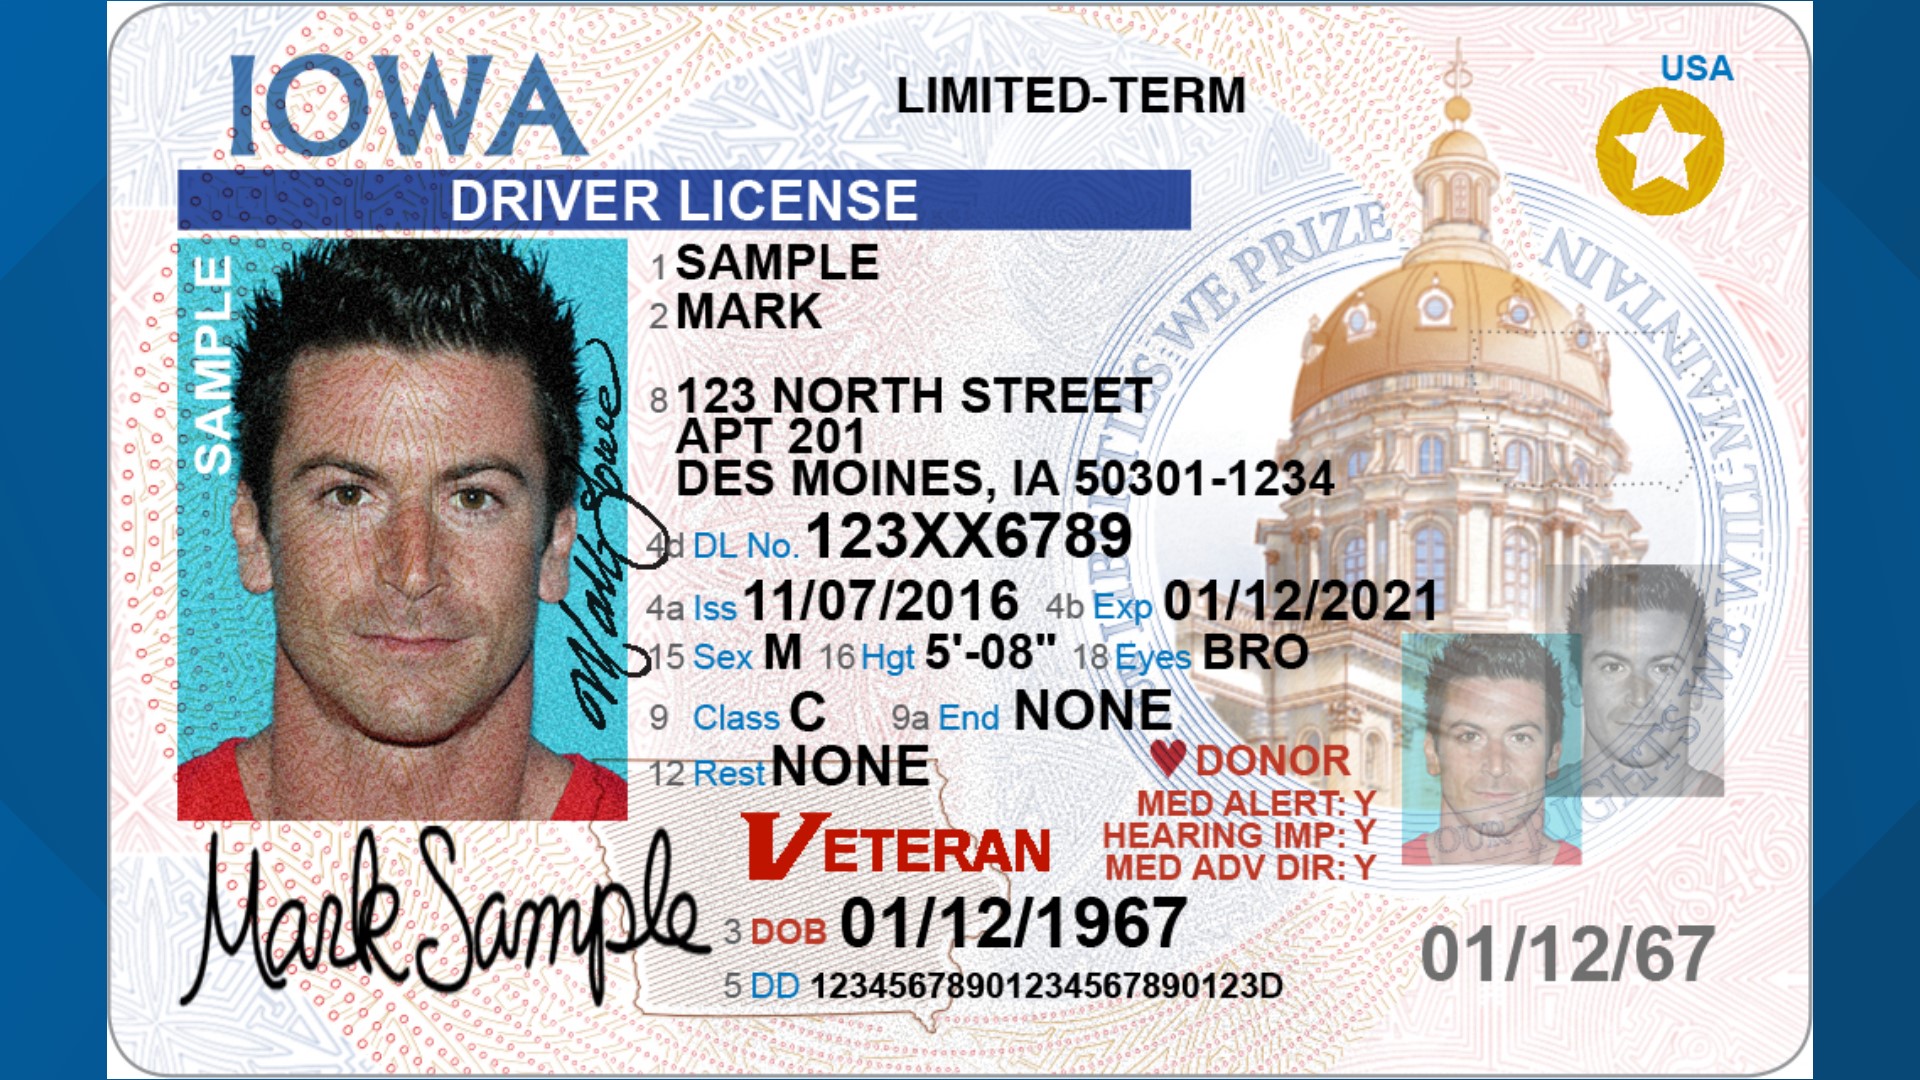 when does a driver's license expire